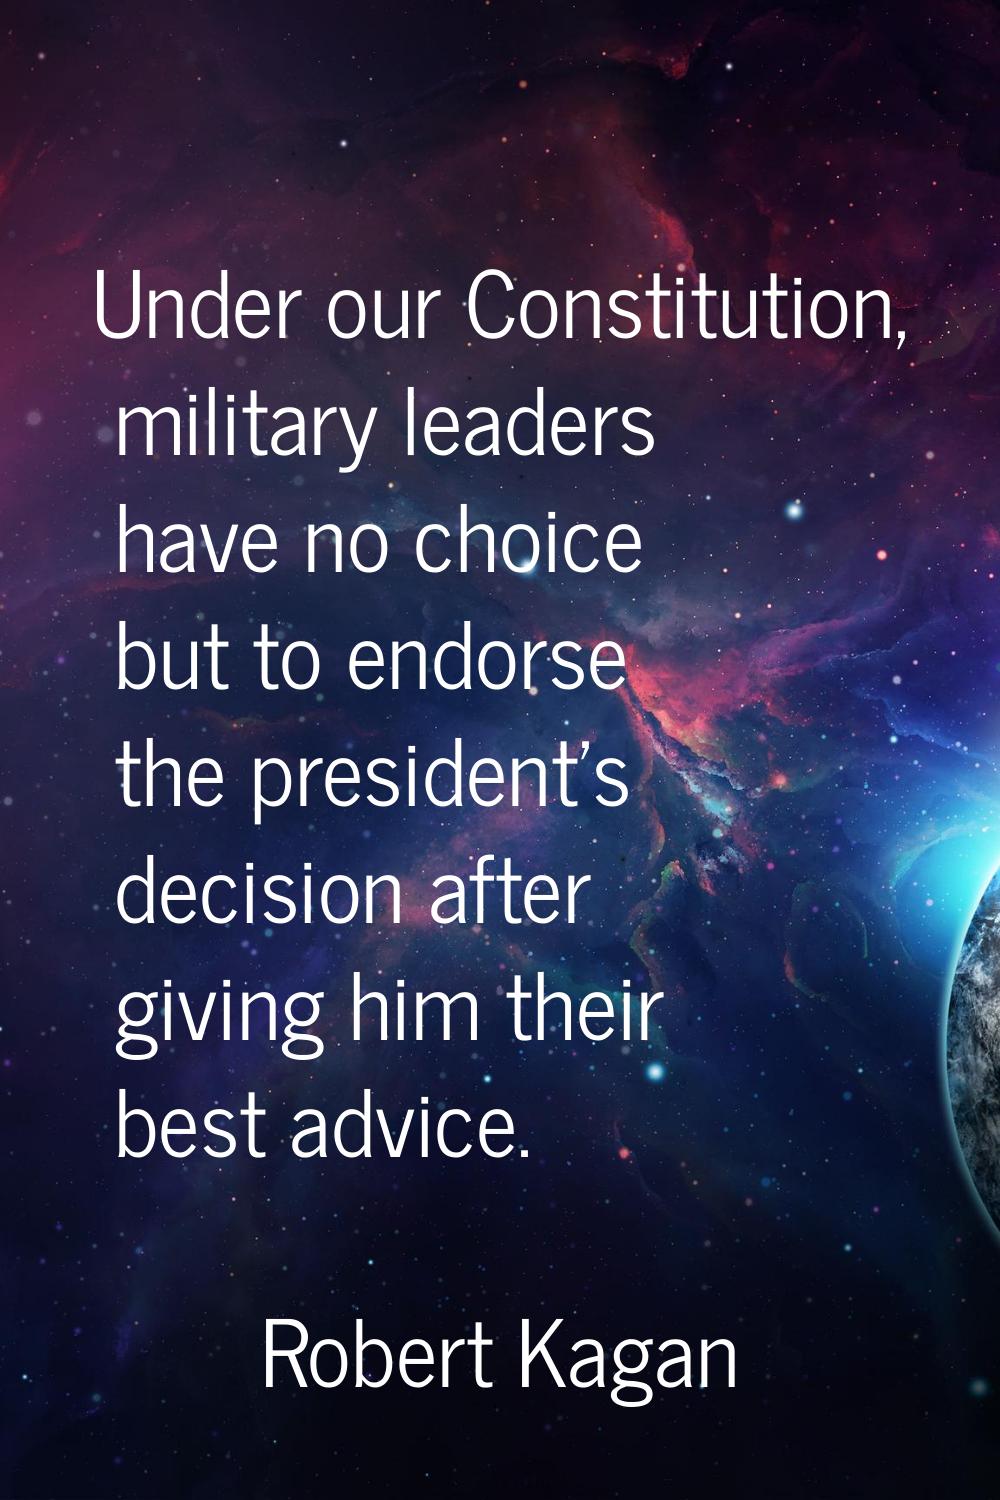 Under our Constitution, military leaders have no choice but to endorse the president's decision aft